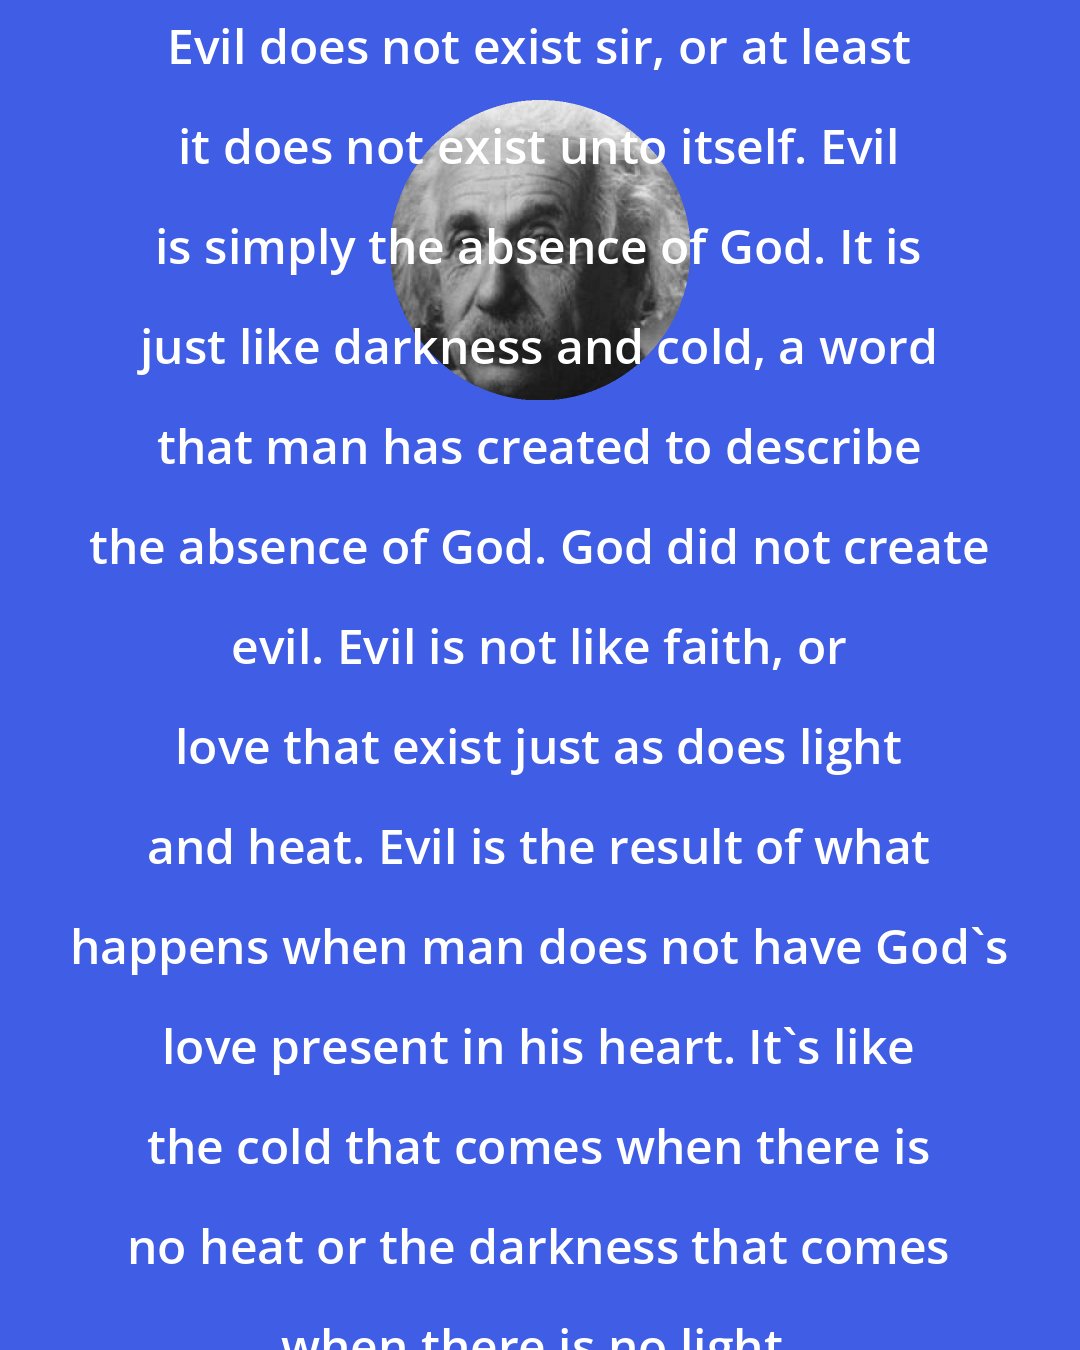 Albert Einstein: Evil does not exist sir, or at least it does not exist unto itself. Evil is simply the absence of God. It is just like darkness and cold, a word that man has created to describe the absence of God. God did not create evil. Evil is not like faith, or love that exist just as does light and heat. Evil is the result of what happens when man does not have God's love present in his heart. It's like the cold that comes when there is no heat or the darkness that comes when there is no light.